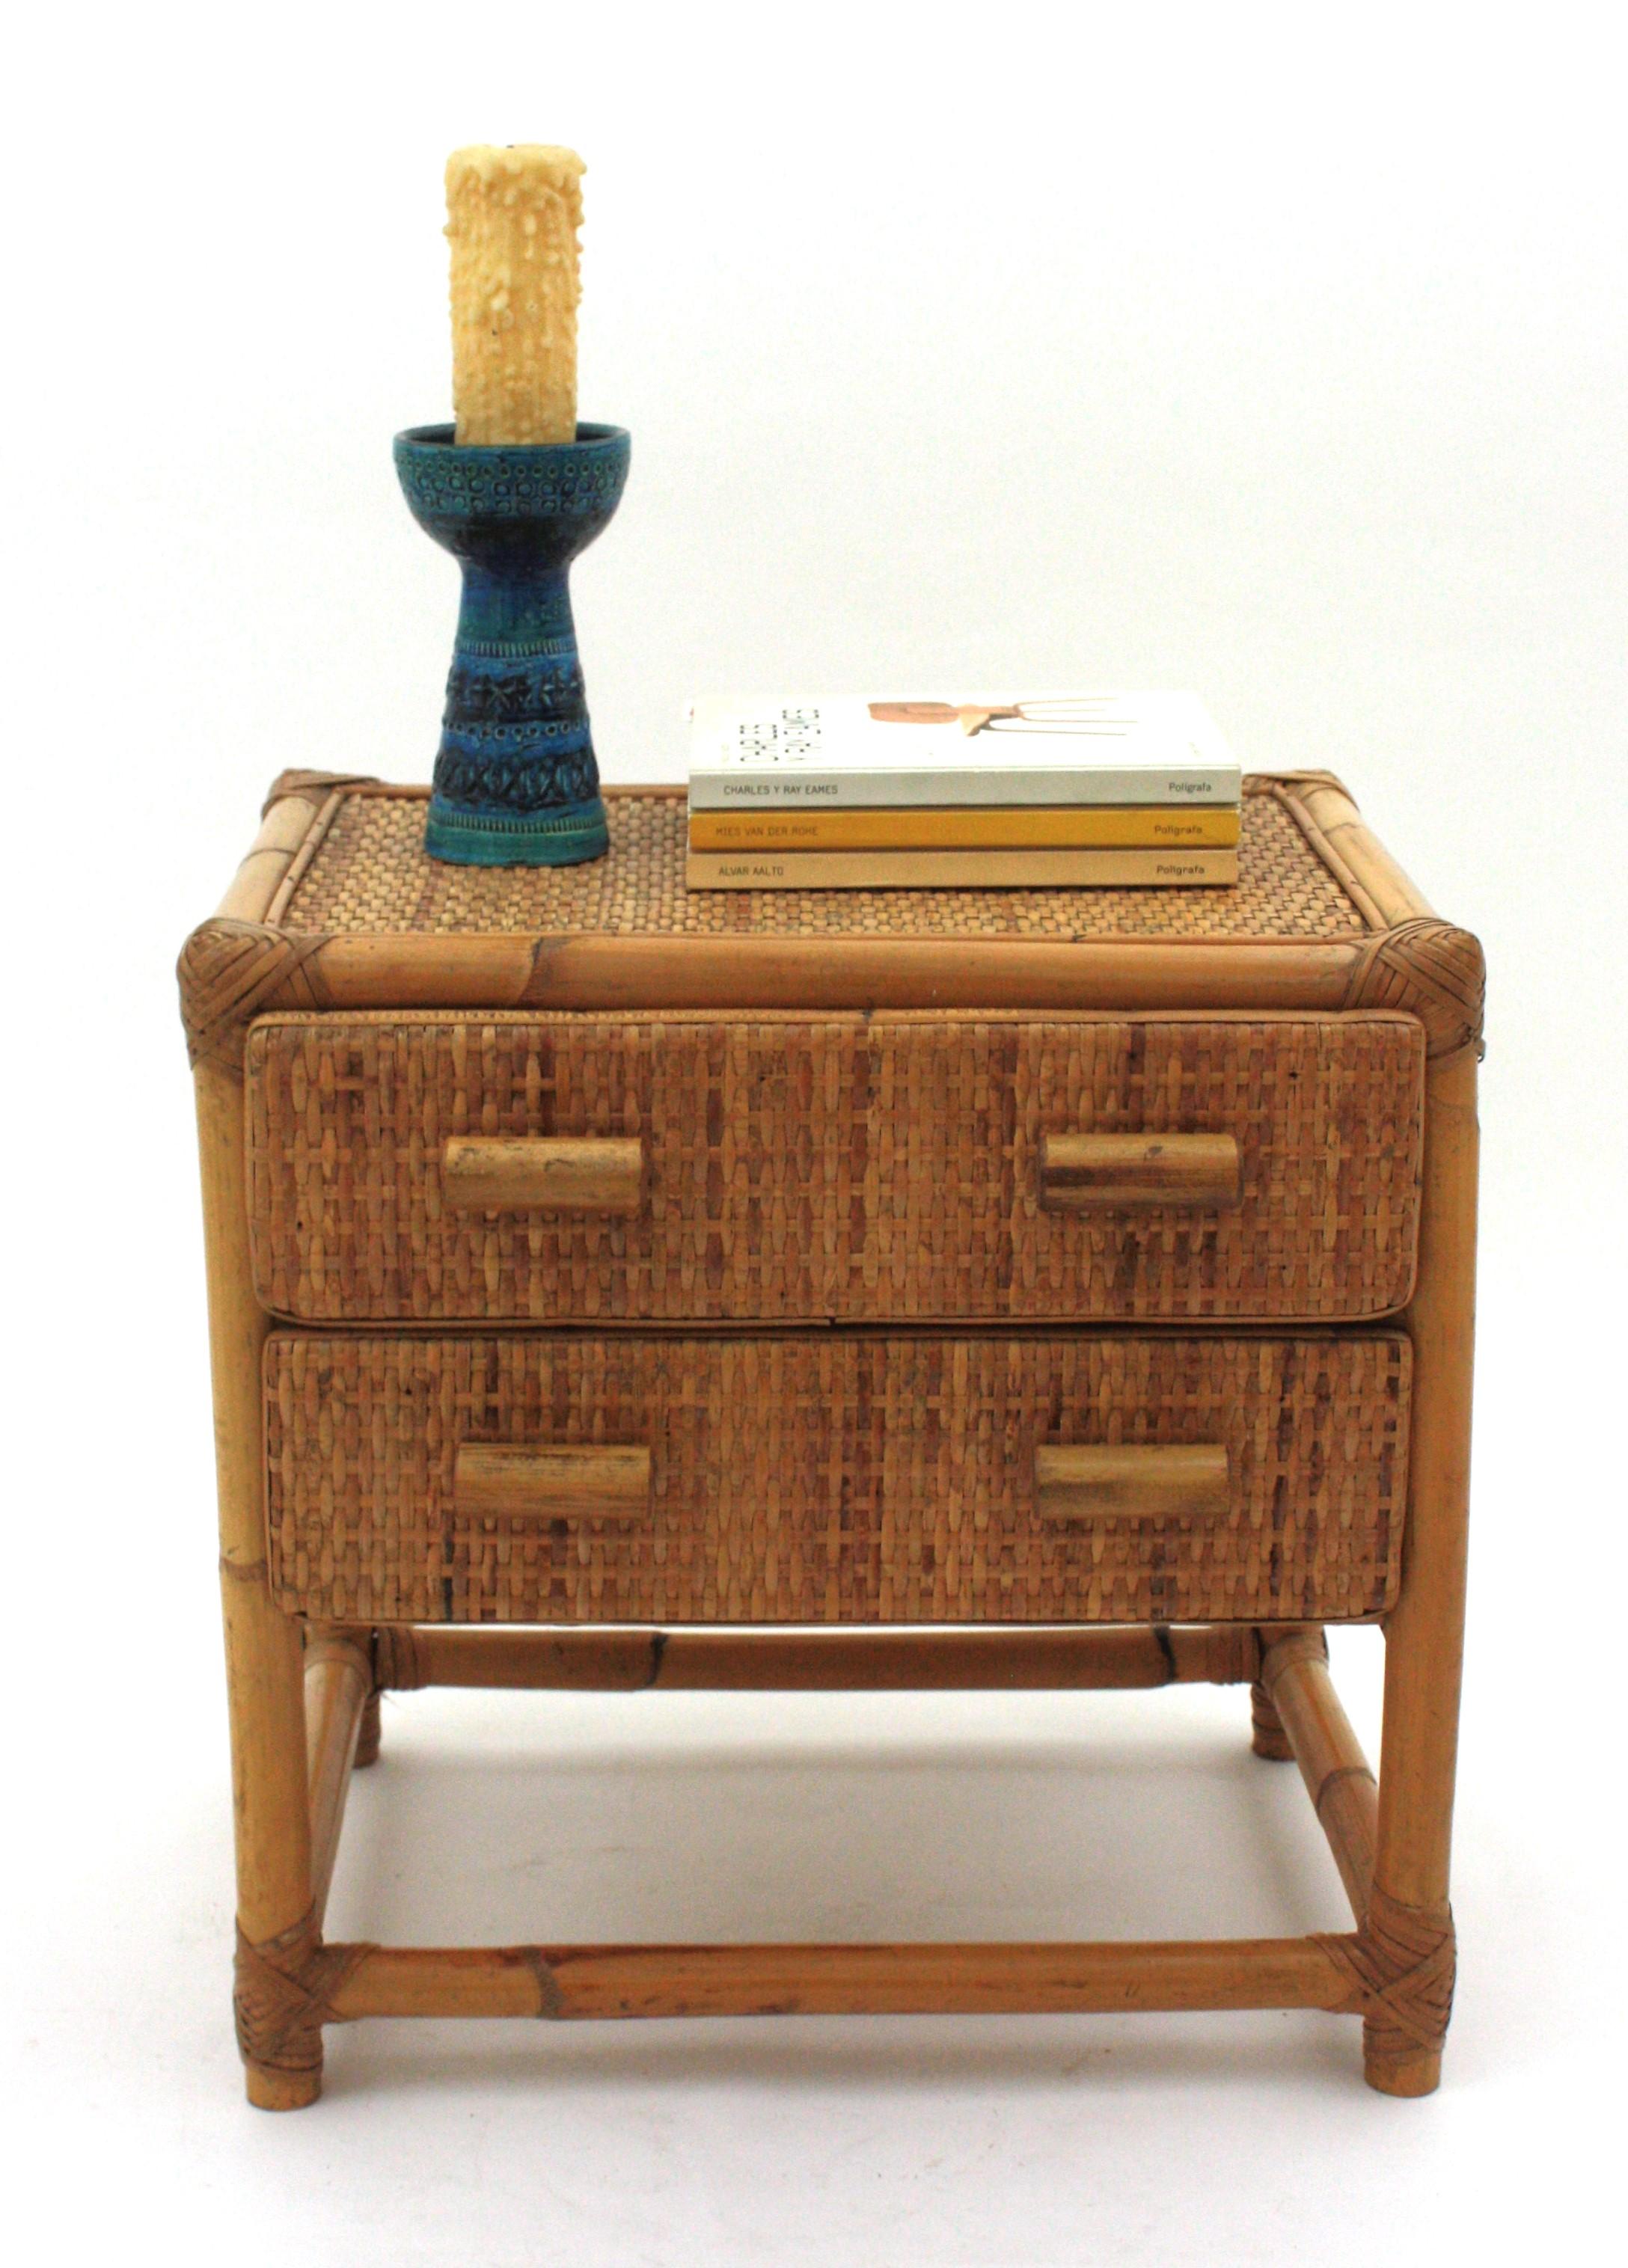 Hand-Crafted Rattan Woven Wicker Side Table / Night Stand, 1960s For Sale